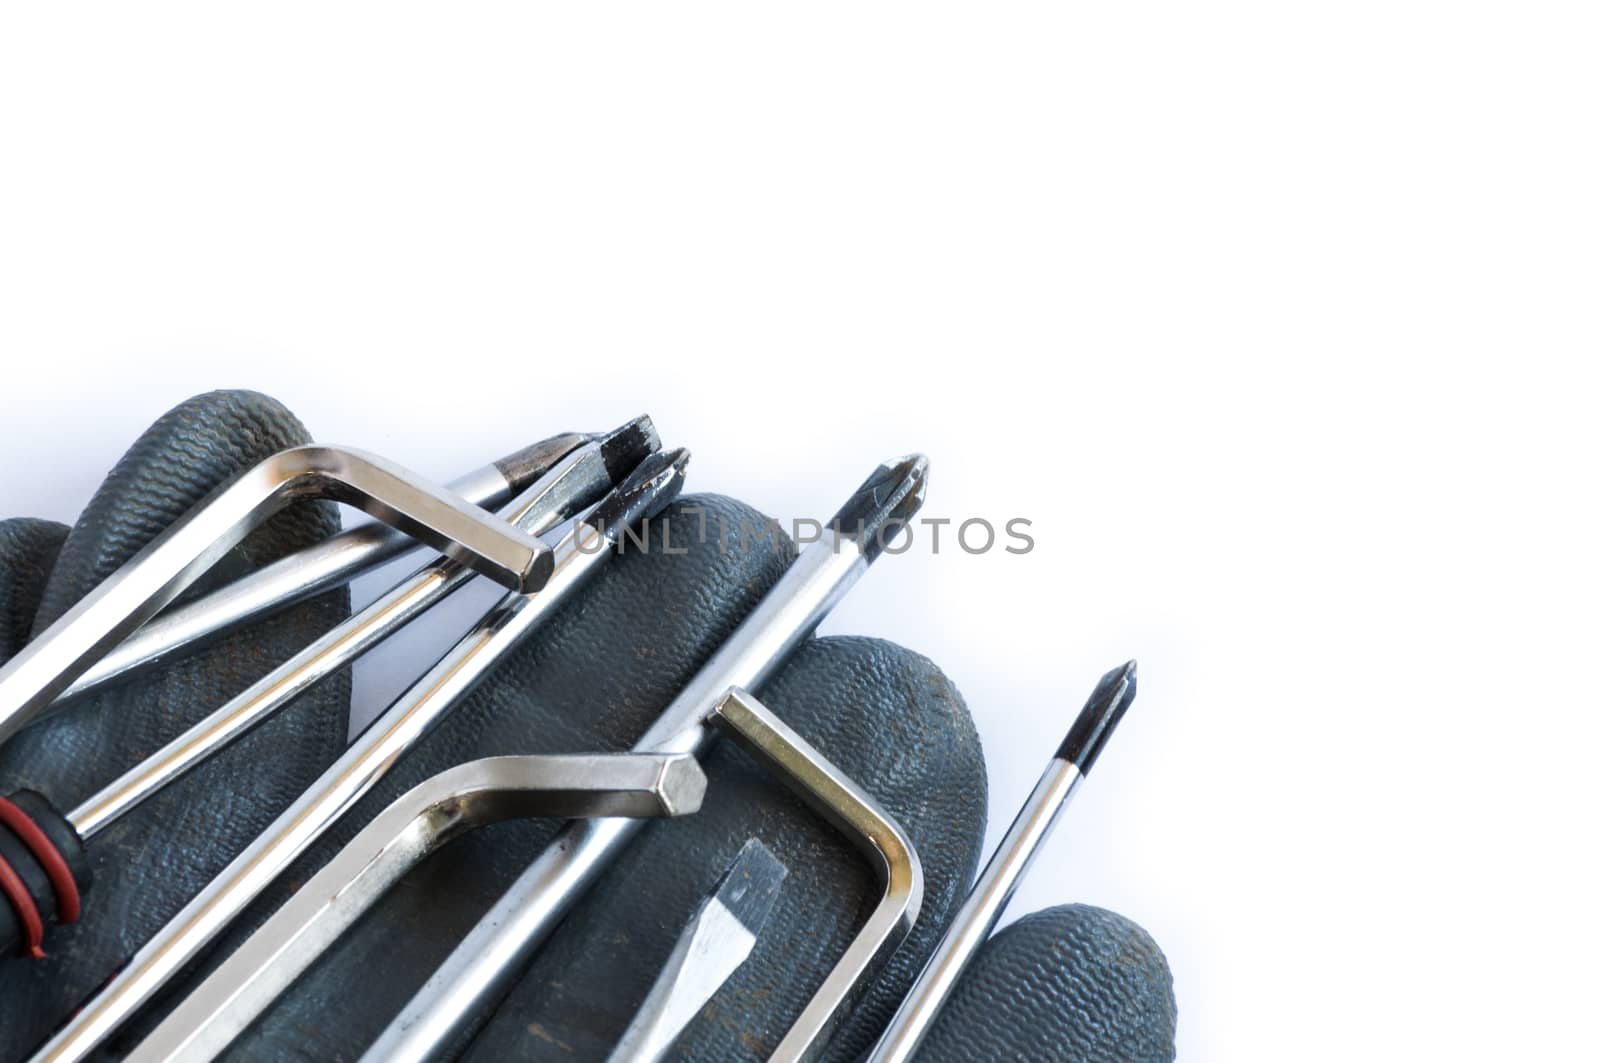 Set of screwdrivers and glove over a white background by maxmitzu